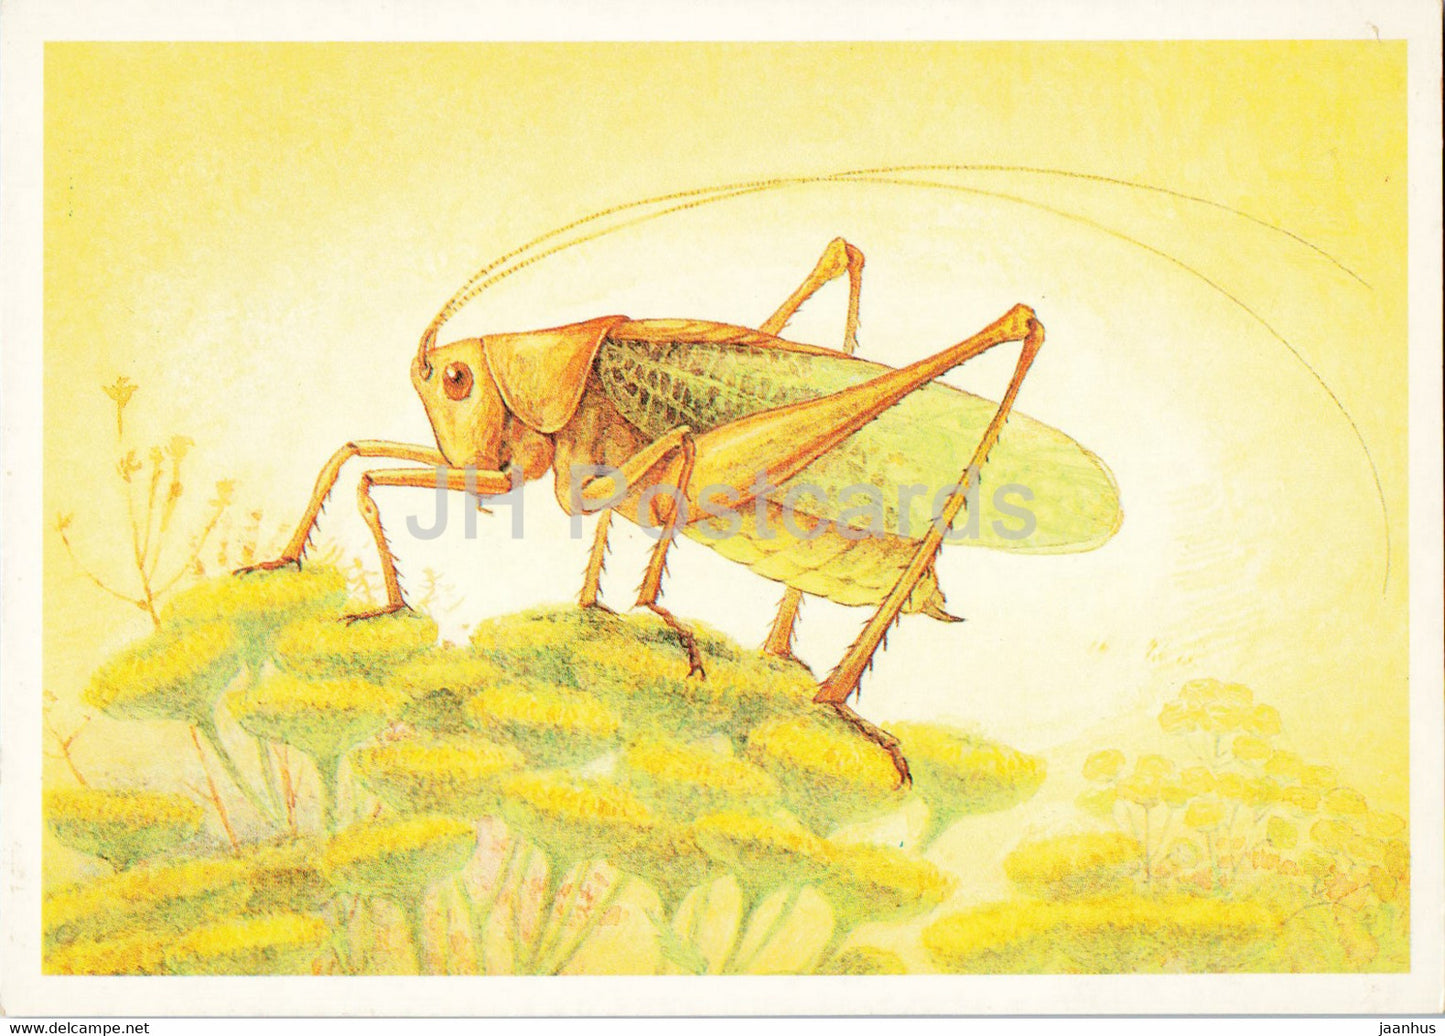 Tettigonia cantans - Upland Green Bush-Cricket - Insects - illustration - 1990 - Russia USSR - unused - JH Postcards